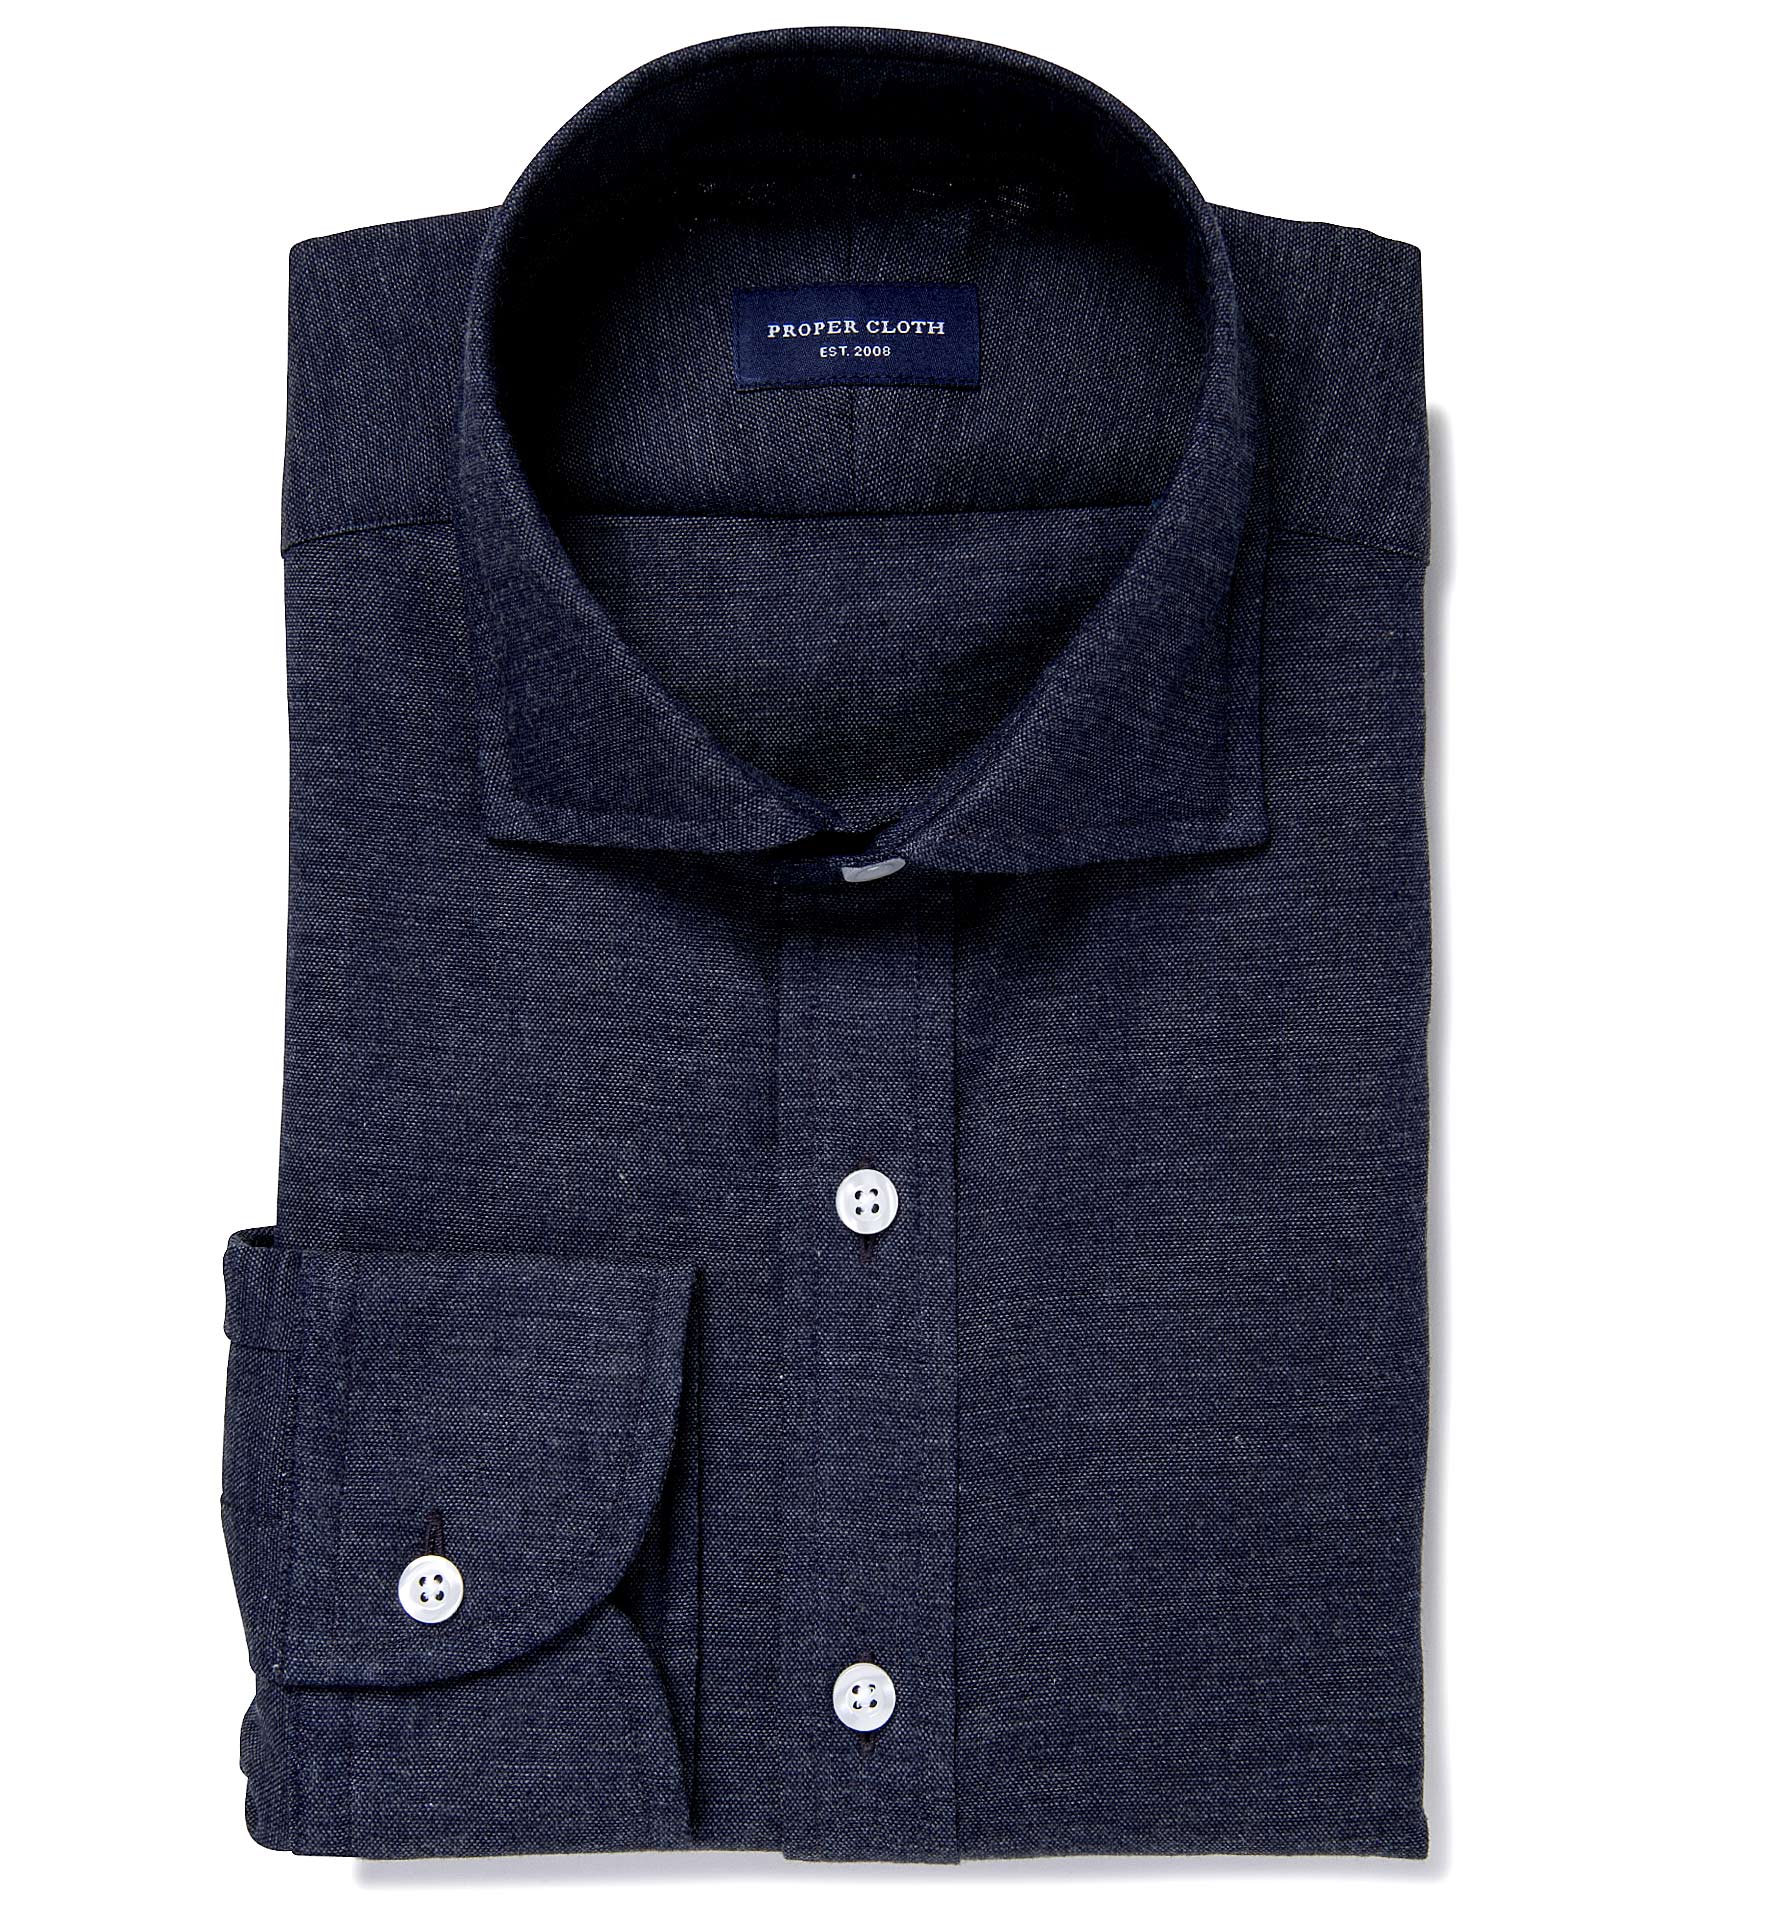 Japanese Dark Blue Chambray Fitted Shirt by Proper Cloth